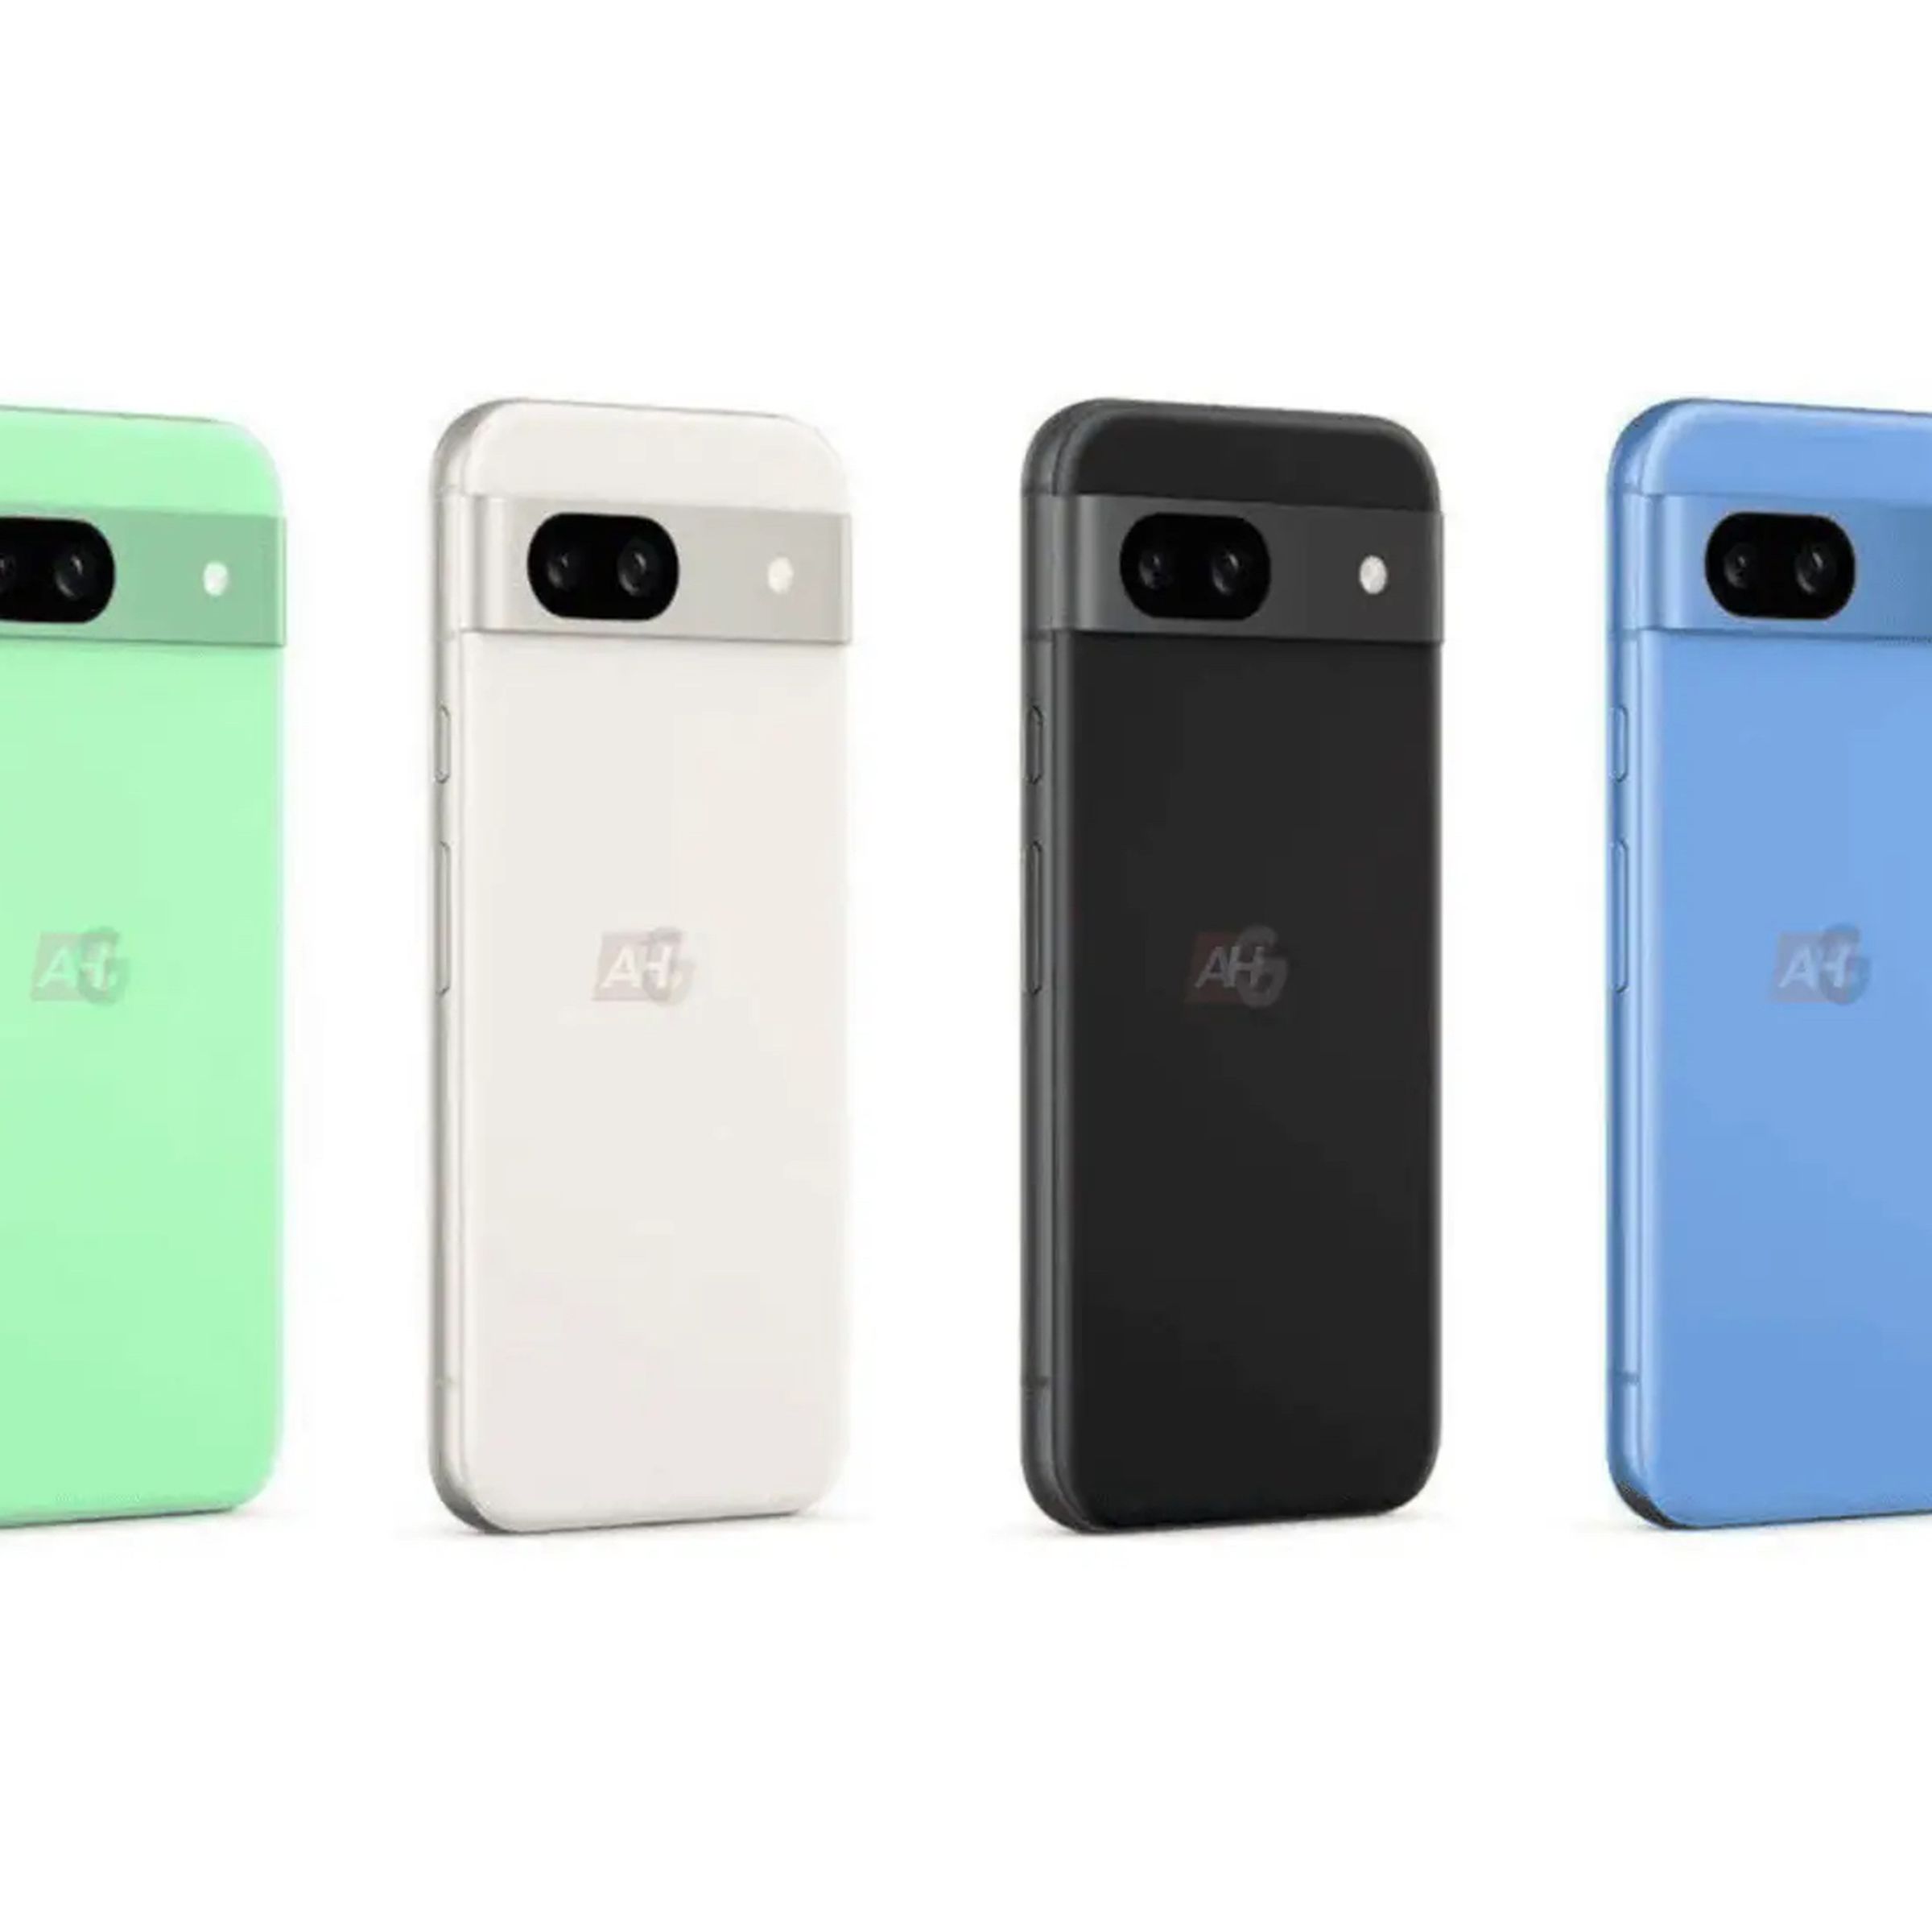 Marketing images of Google’s Pixel 8A phone in four colors.